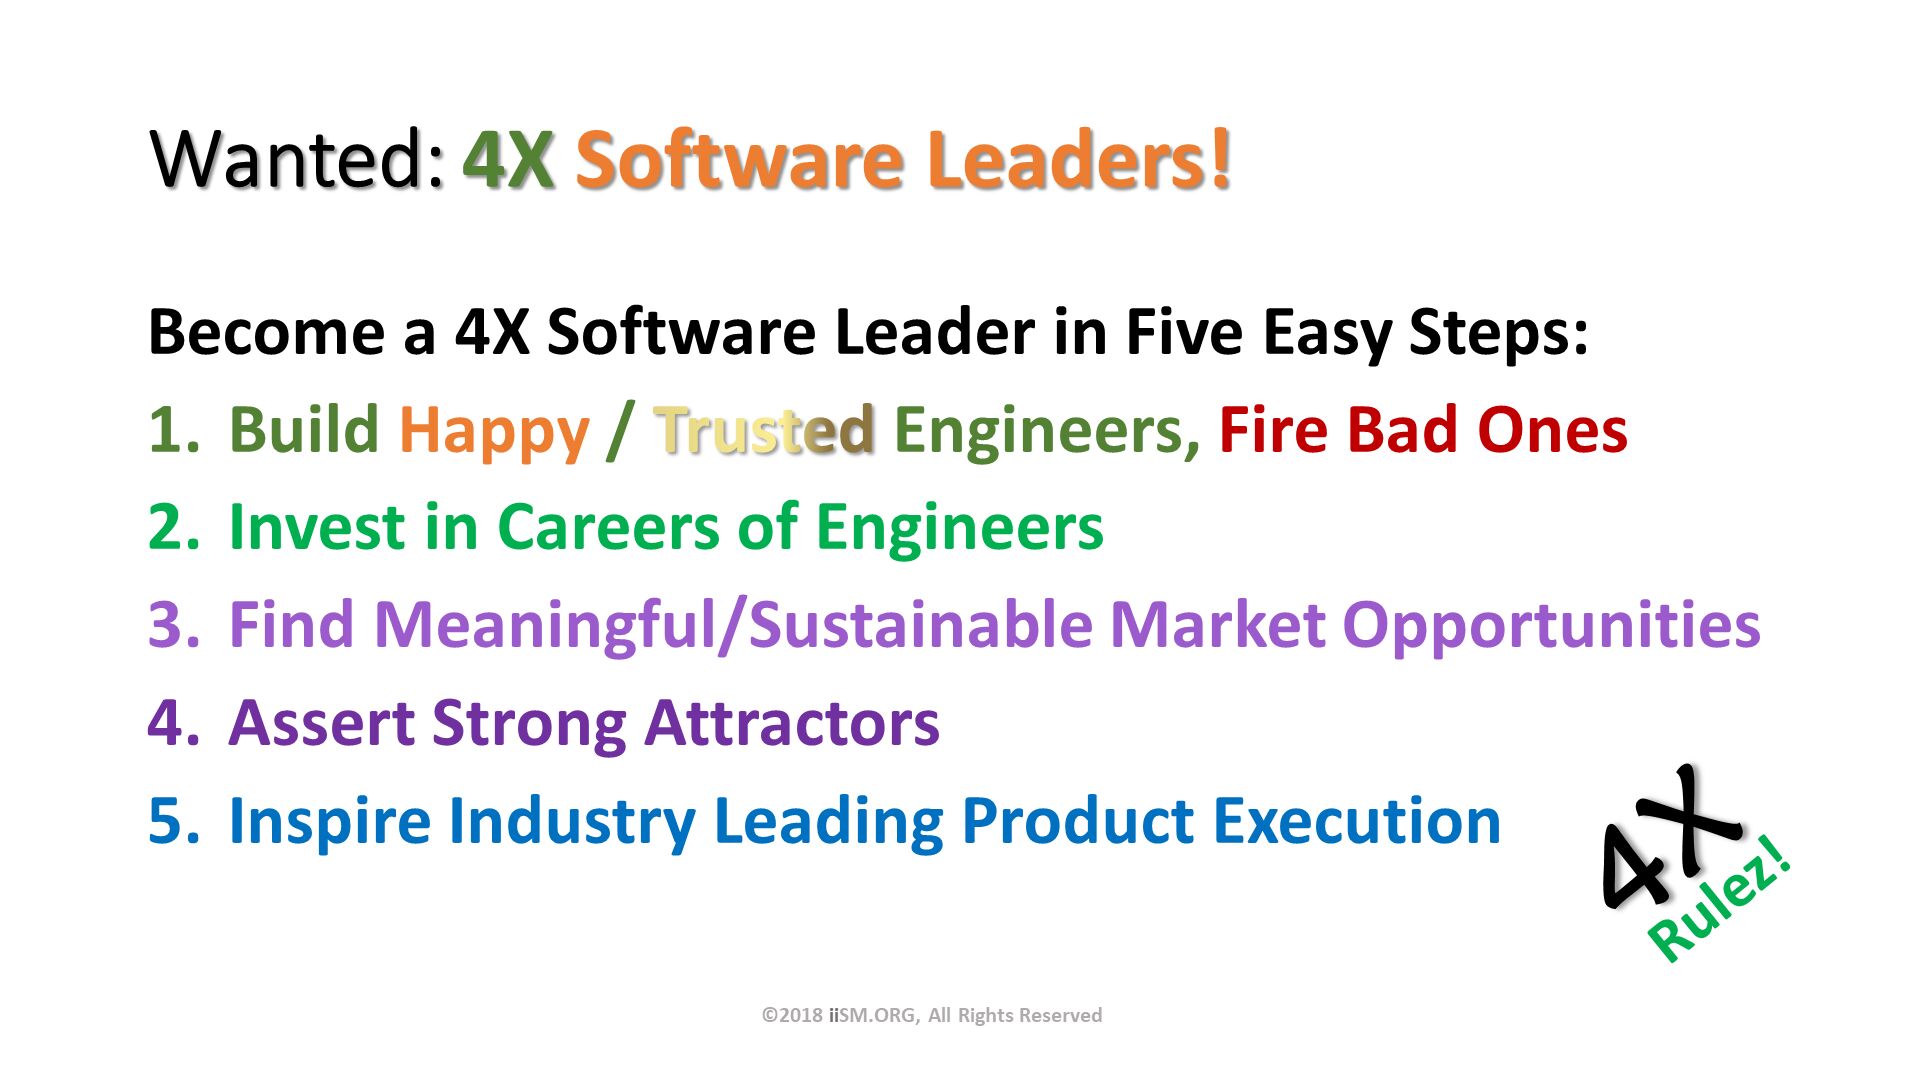 Wanted: 4X Software Leaders!. Become a 4X Software Leader in Five Easy Steps:
Build Happy / Trusted Engineers, Fire Bad Ones
Invest in Careers of Engineers
Find Meaningful/Sustainable Market Opportunities
Assert Strong Attractors
Inspire Industry Leading Product Execution. ©2018 iiSM.ORG, All Rights Reserved. 